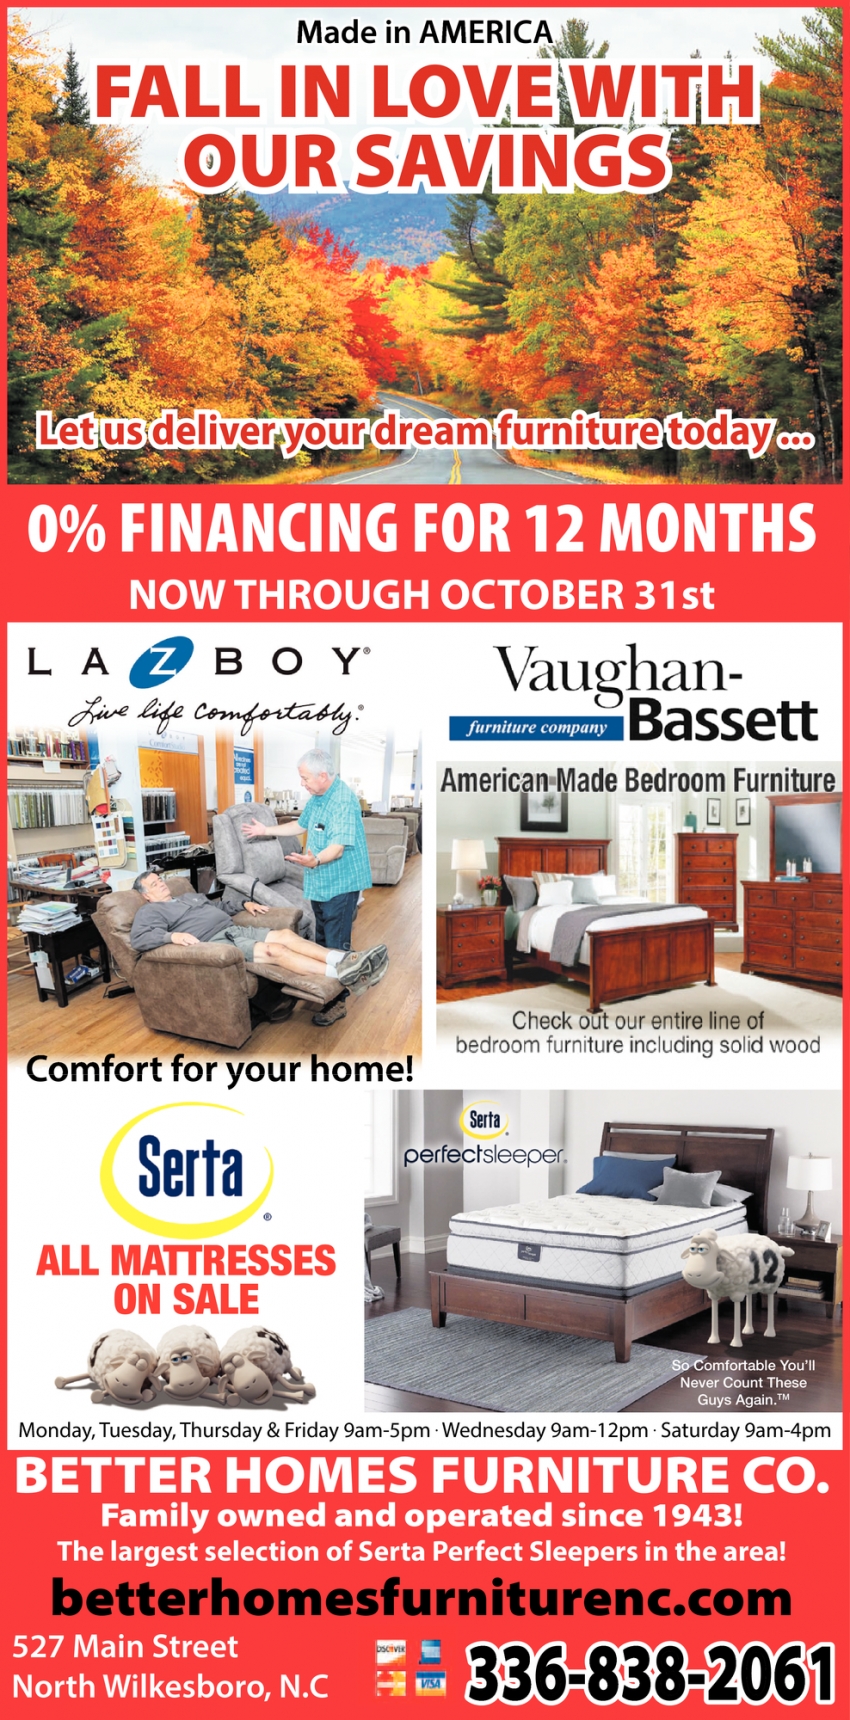 Fall In Love with Our Savings